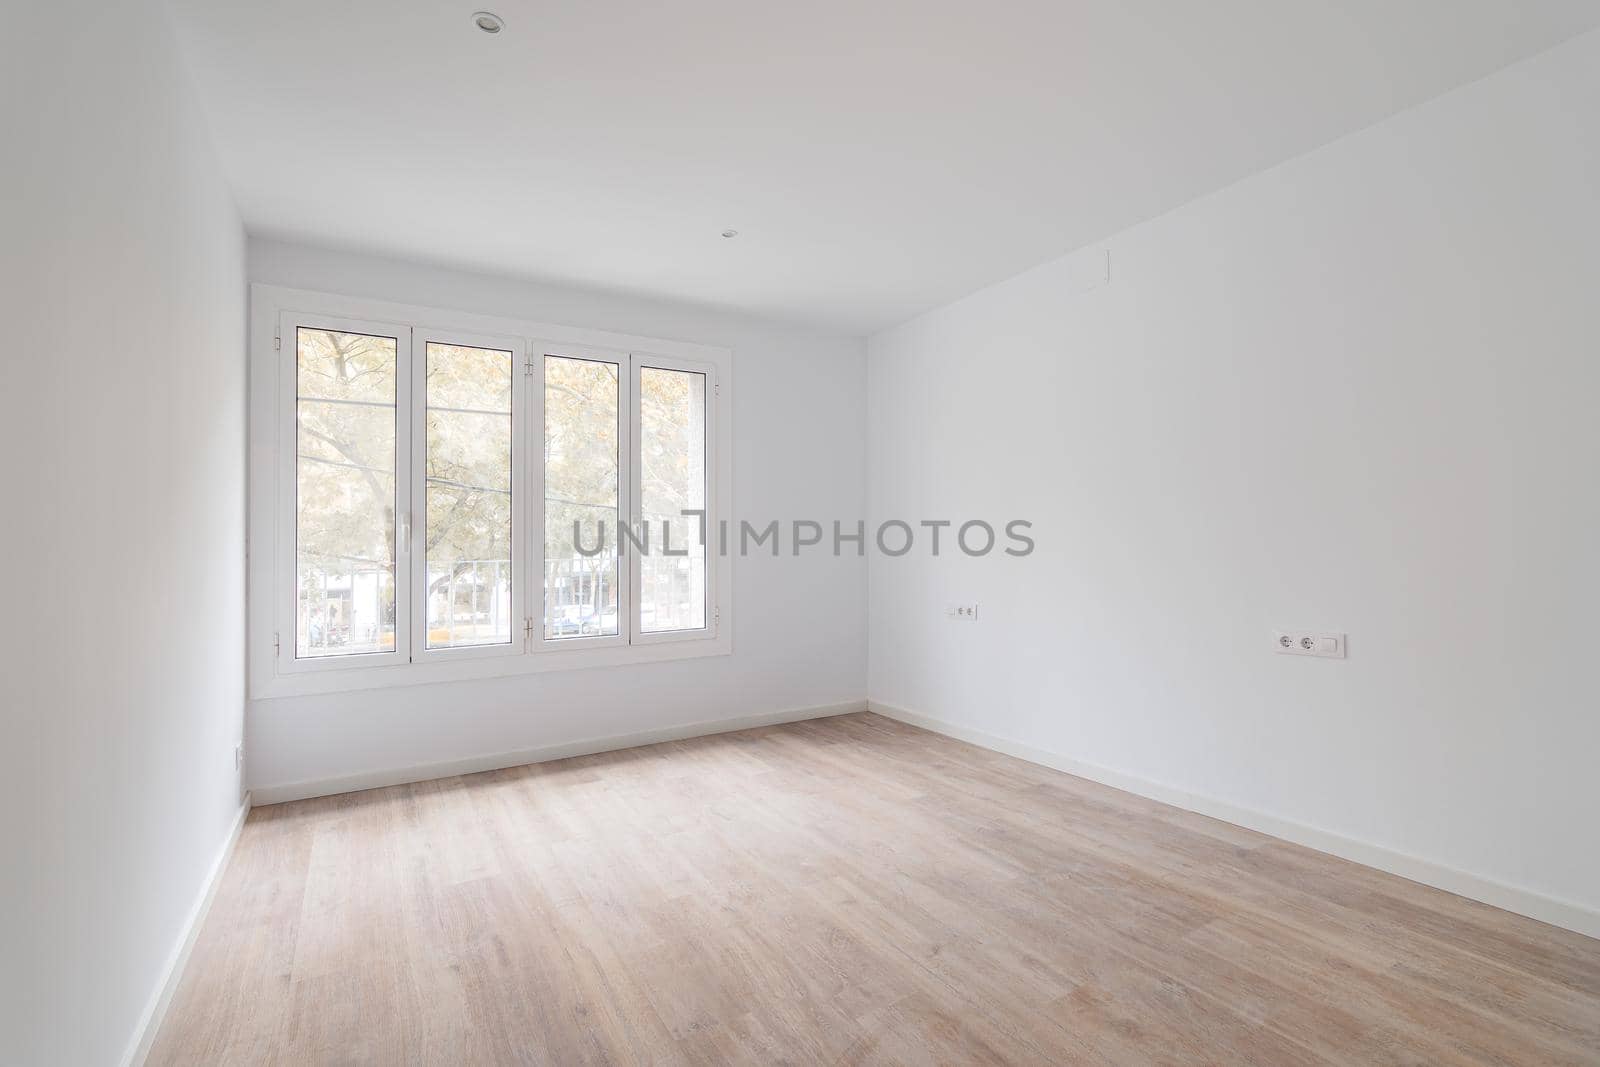 Empty dusted room after renovation with white walls, windows and wooden floor by apavlin